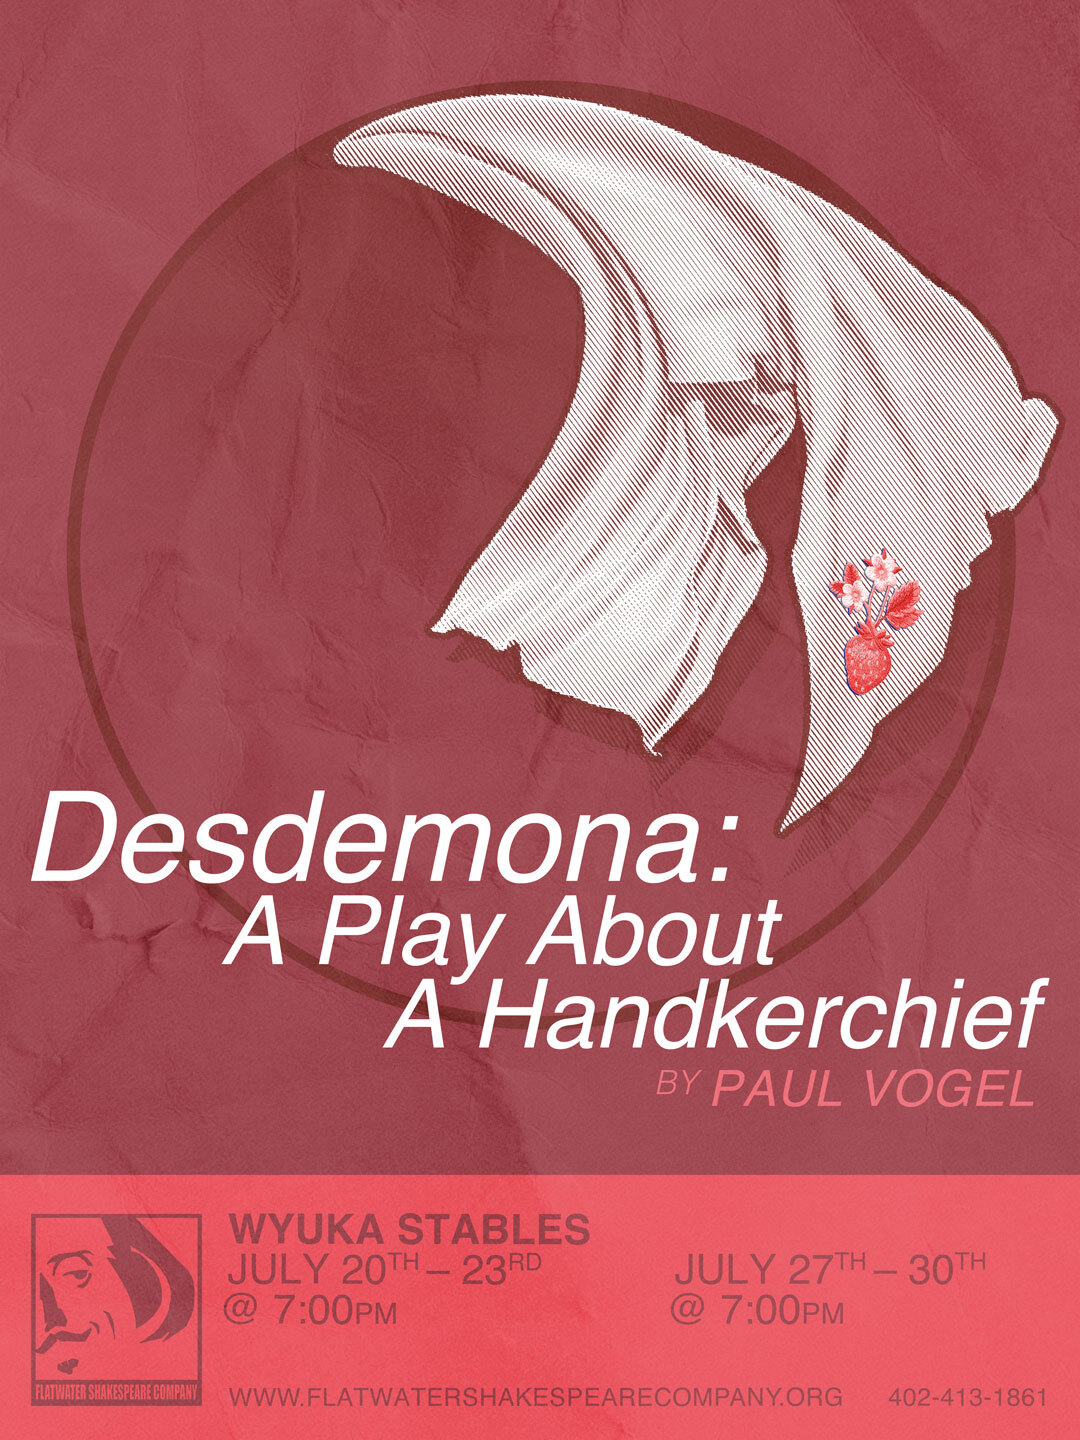 7/23 STU - STUDENT: Sun. July 23, 2023 | 7:00 p.m. - 10:00 p.m. CST | Wyuka Stables (Desdemona: A Play about a Handkerchief)